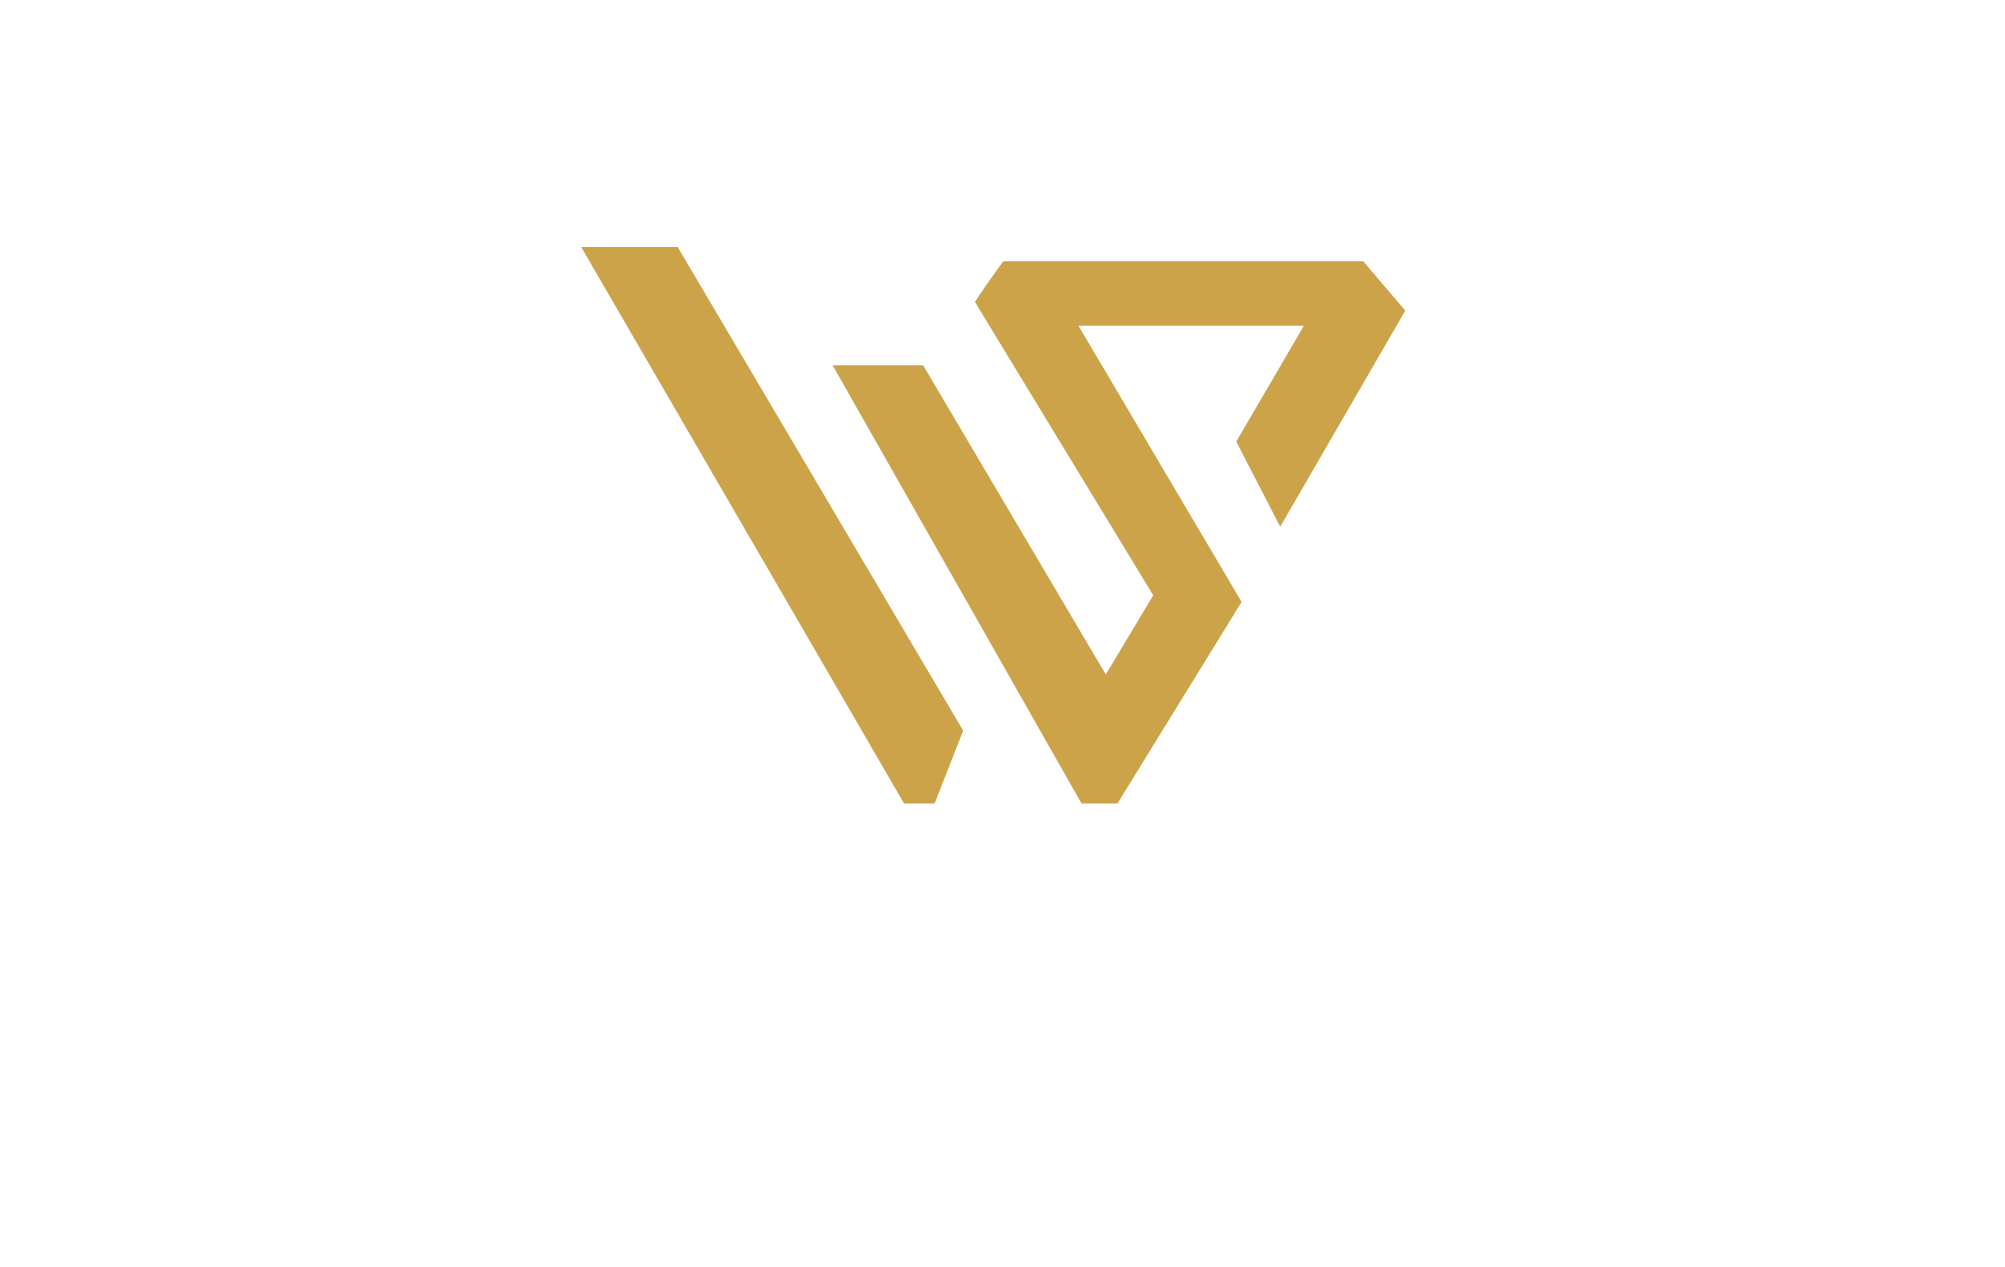 About – Wet Structures